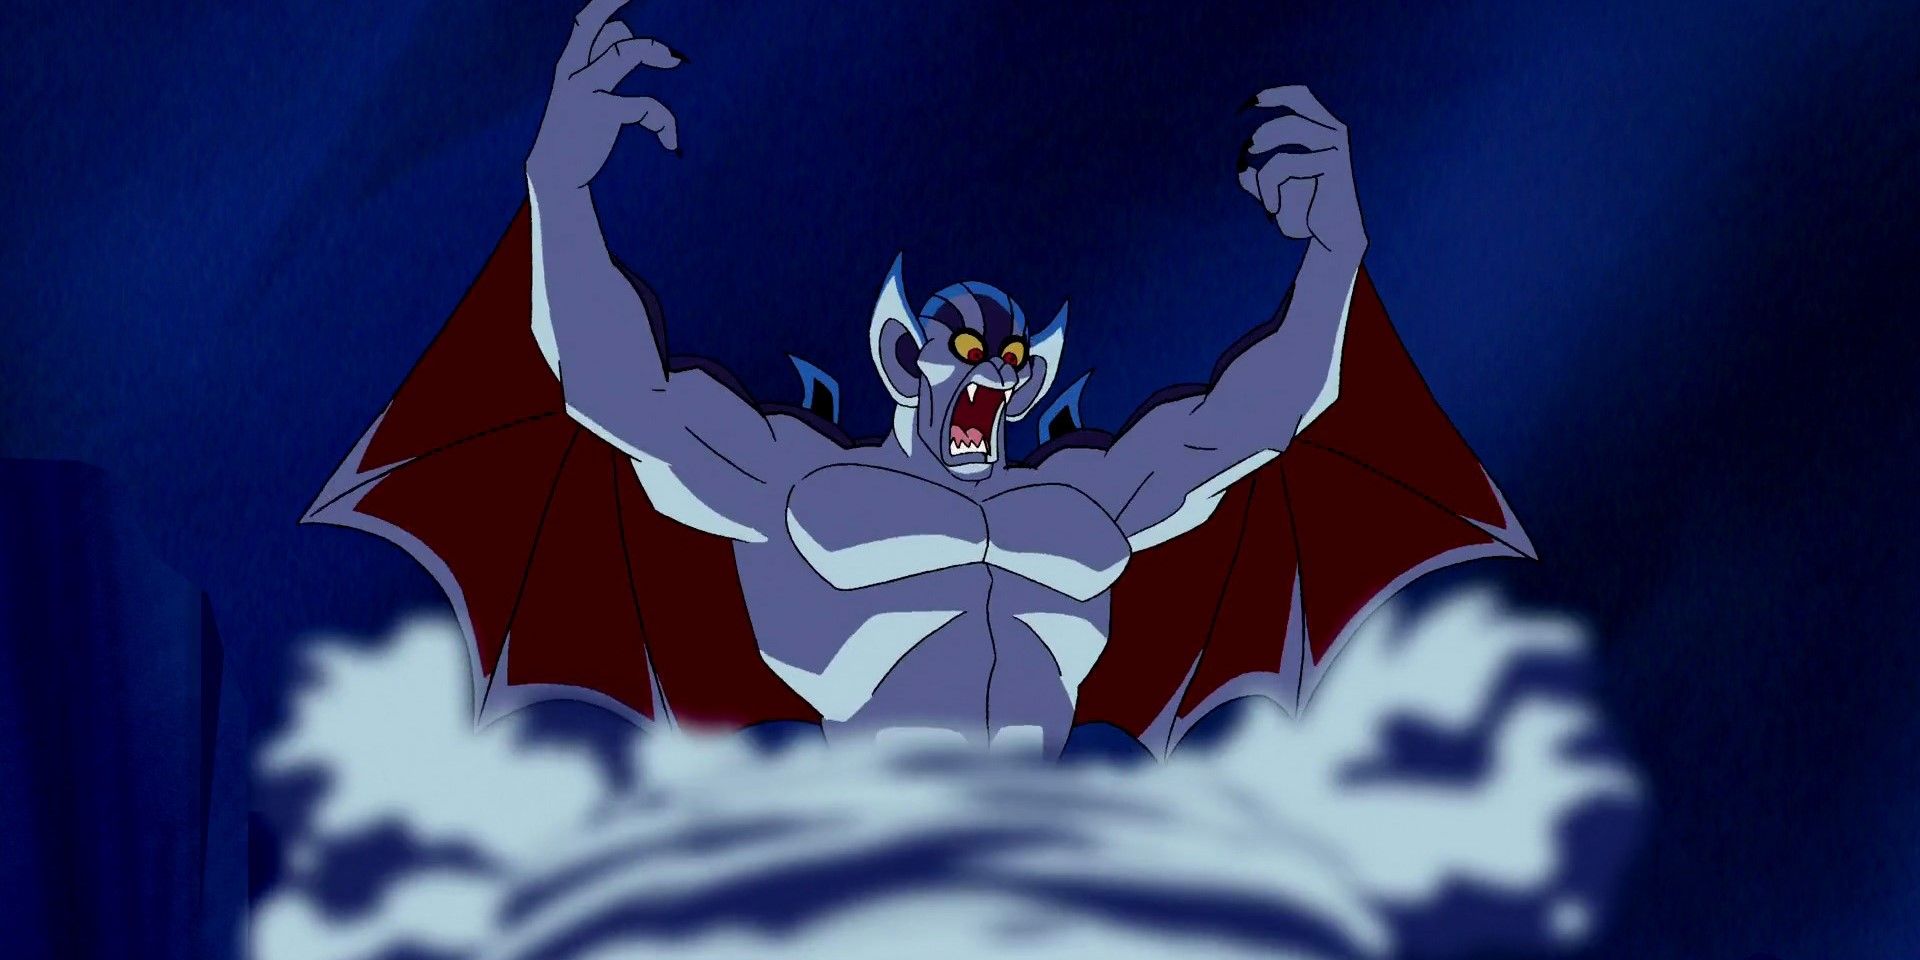 The vampire rising from the mist in Scooby-Doo and the Legend of the Vampire